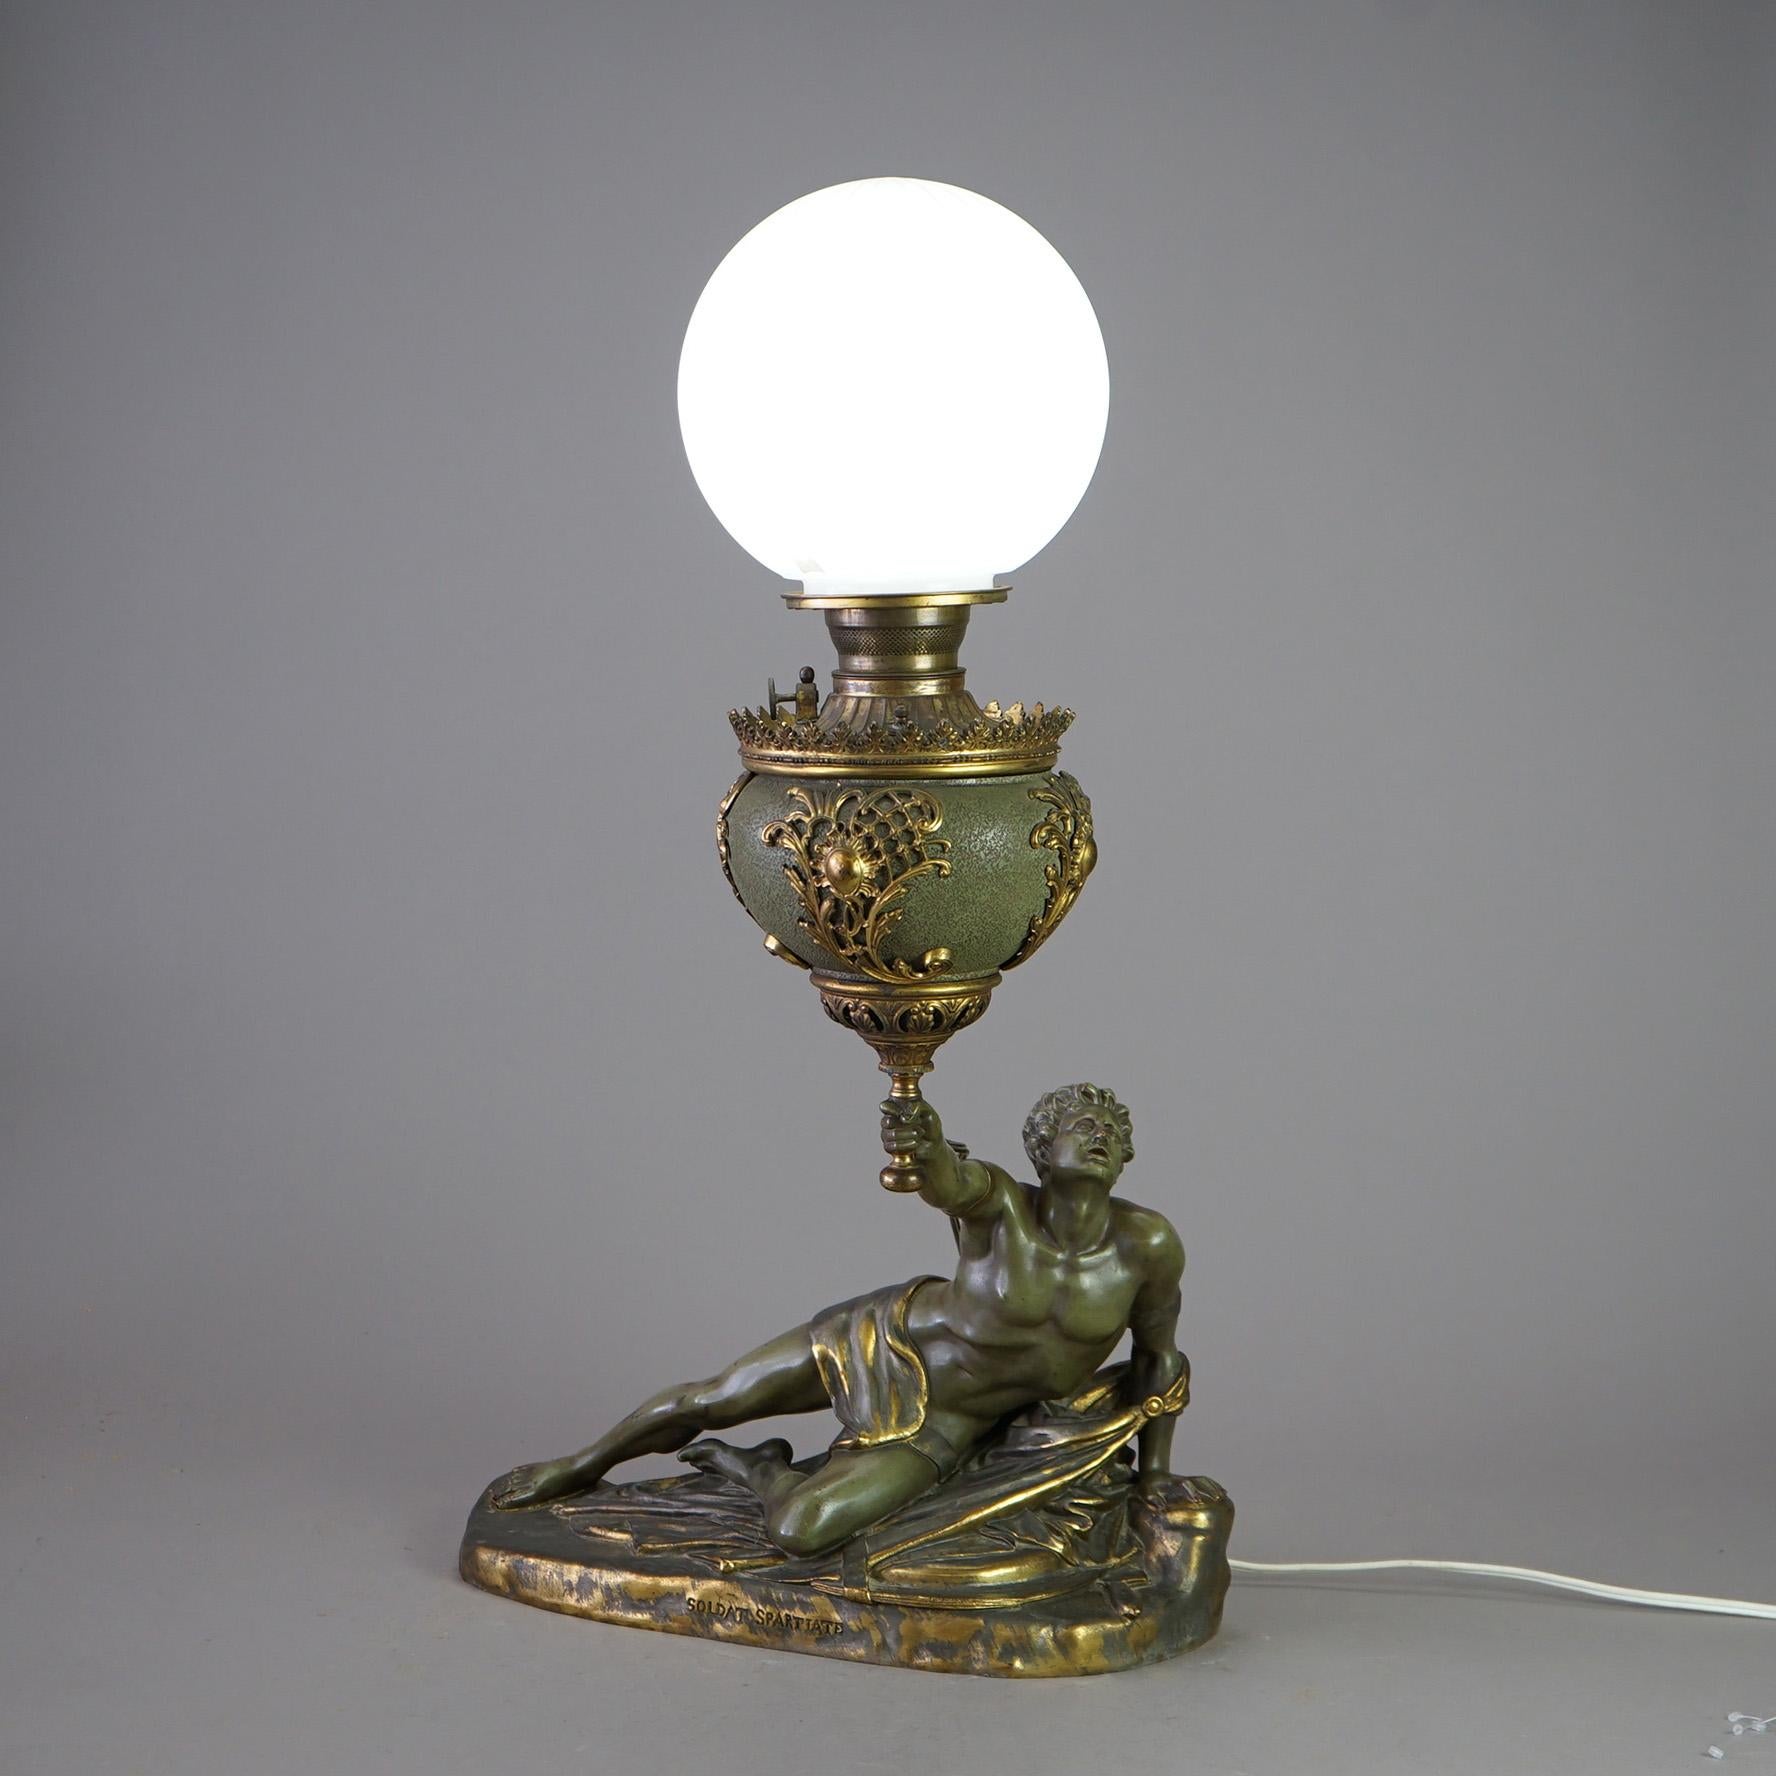 An antique figural 'Soldat Spartiate' table lamp after sculpture by Jean-Pierre Cortot (French, 1787-1843); bronze and brass base  depicts a Spartan soldier holding an oil lamp aloft; titled as photographed; electrified; c1810

Measures - 29